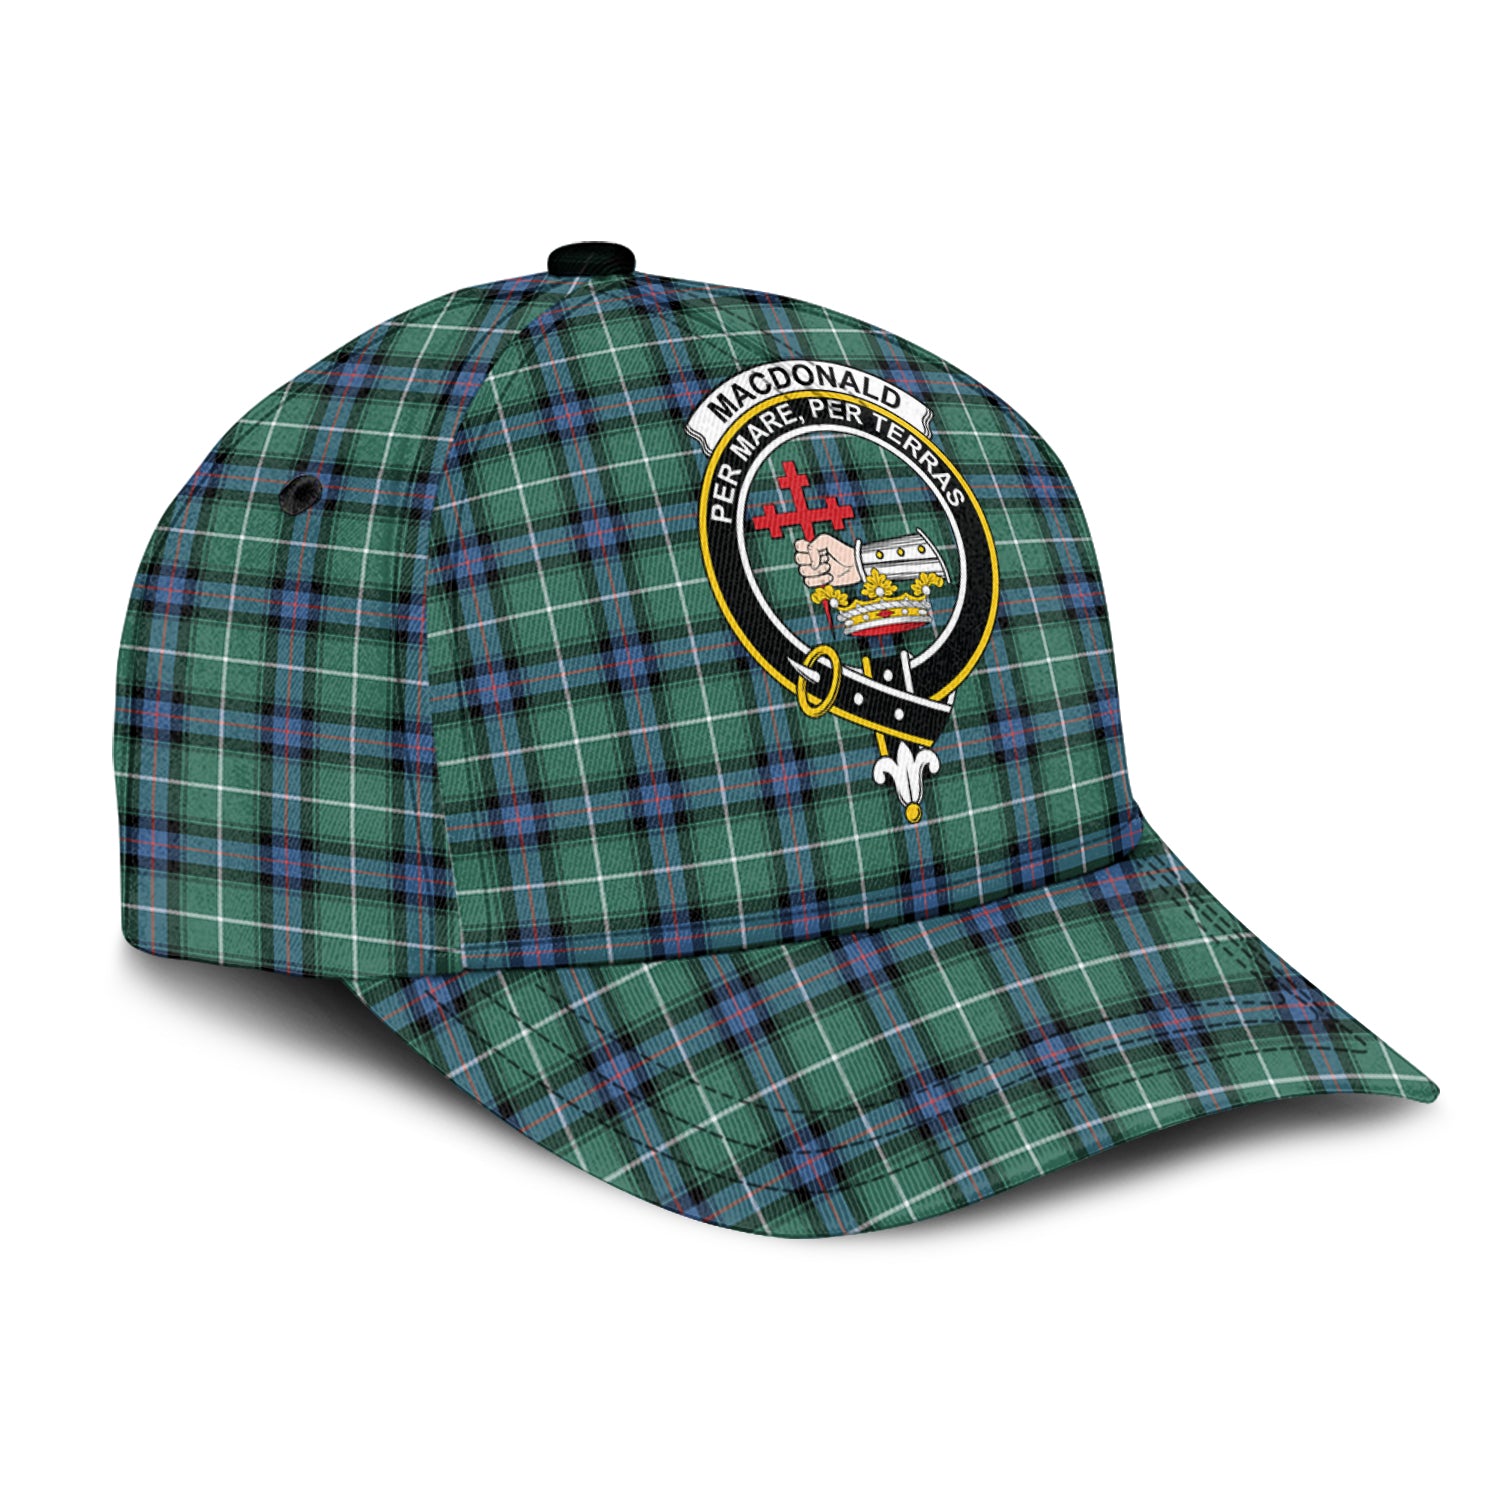 macdonald-of-the-isles-hunting-ancient-tartan-classic-cap-with-family-crest